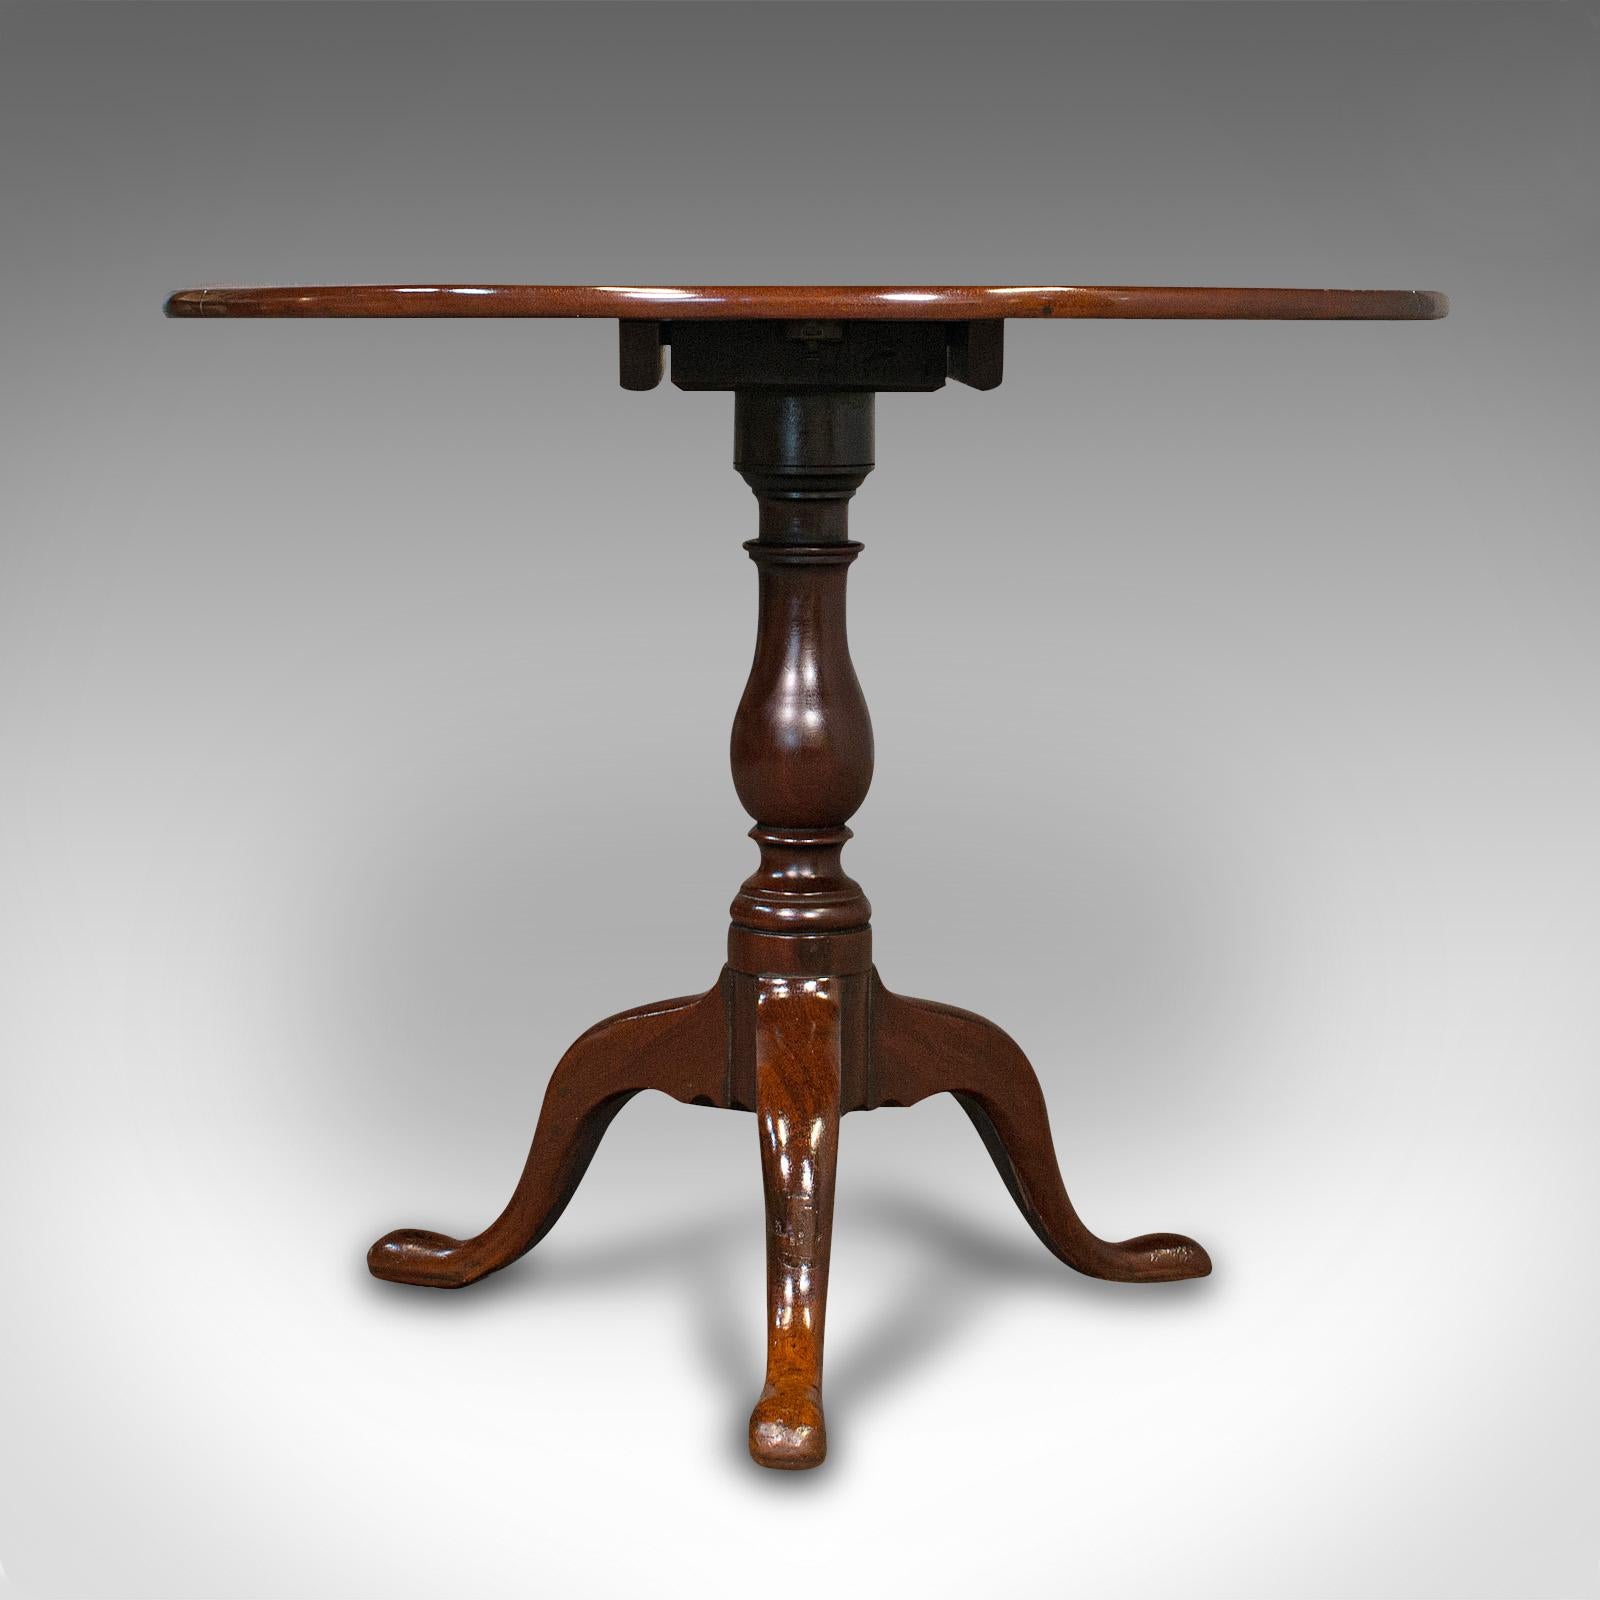 Wood Antique Tilt Top Occasional Table, English, Mahogany, Side, Lamp, Georgian, 1800 For Sale